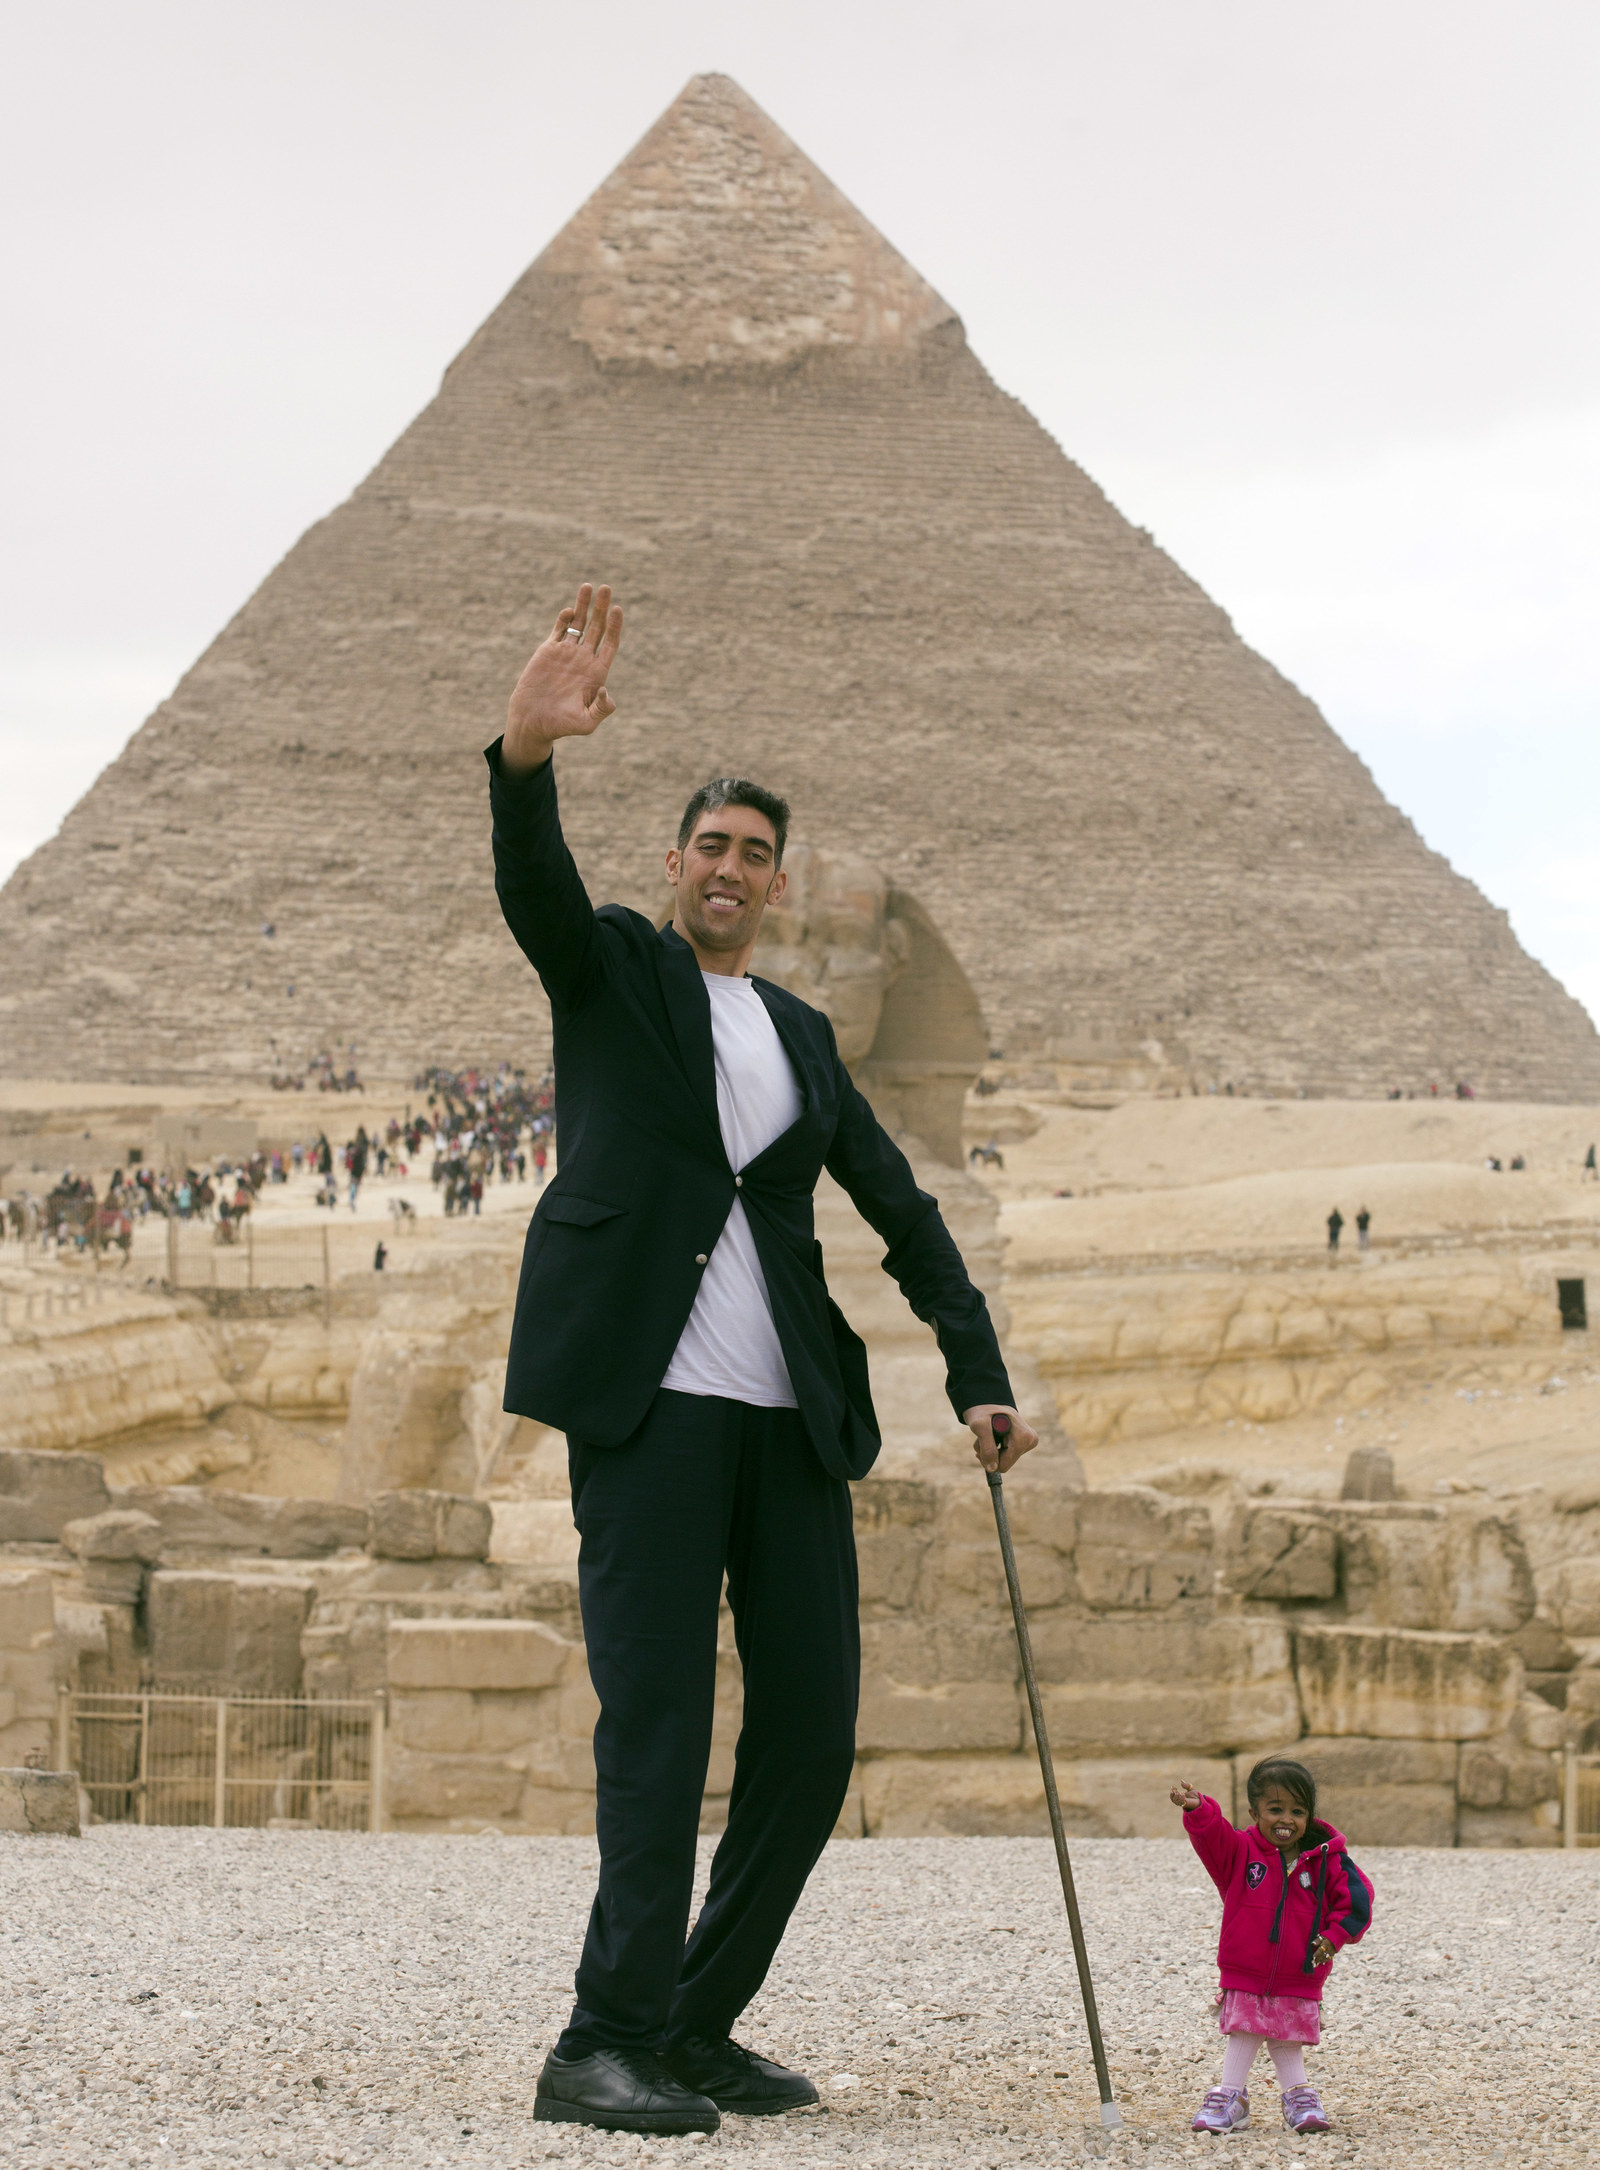 The World's Tallest Man And Shortest Woman Hung Out At The